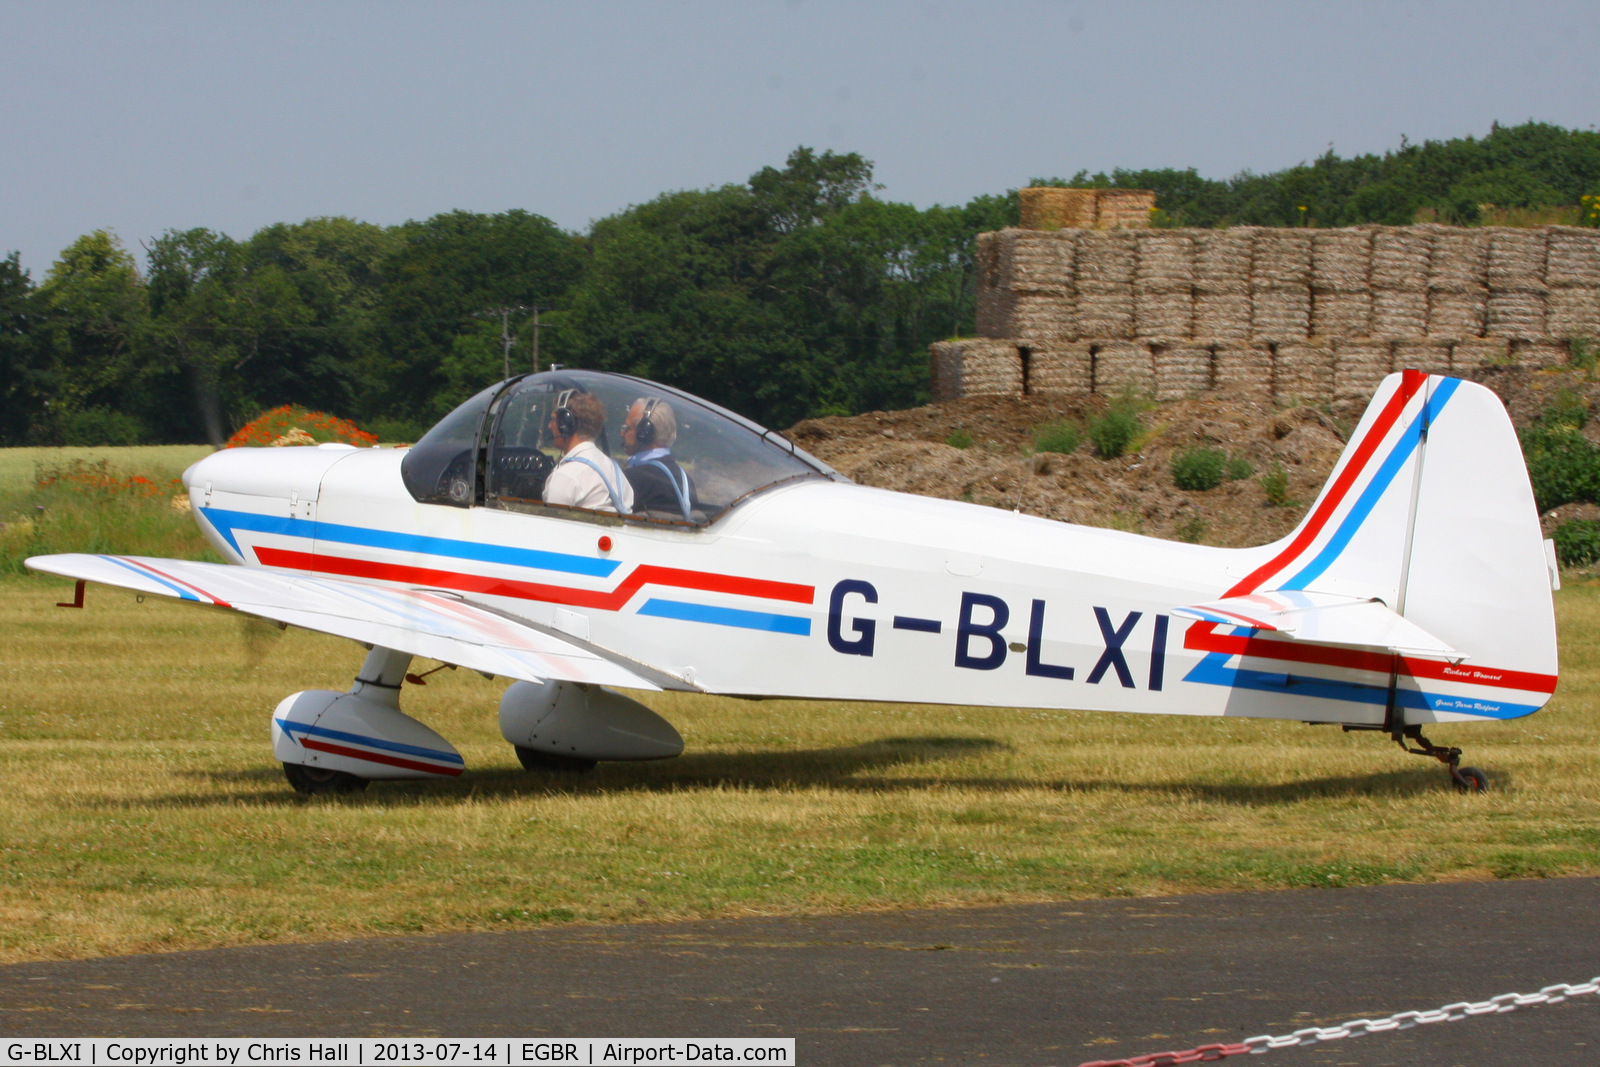 G-BLXI, 1965 Scintex CP-1310-C3 Super Emeraude C/N 937, at the Real Aeroplane Club's Wings & Wheels fly-in, Breighton